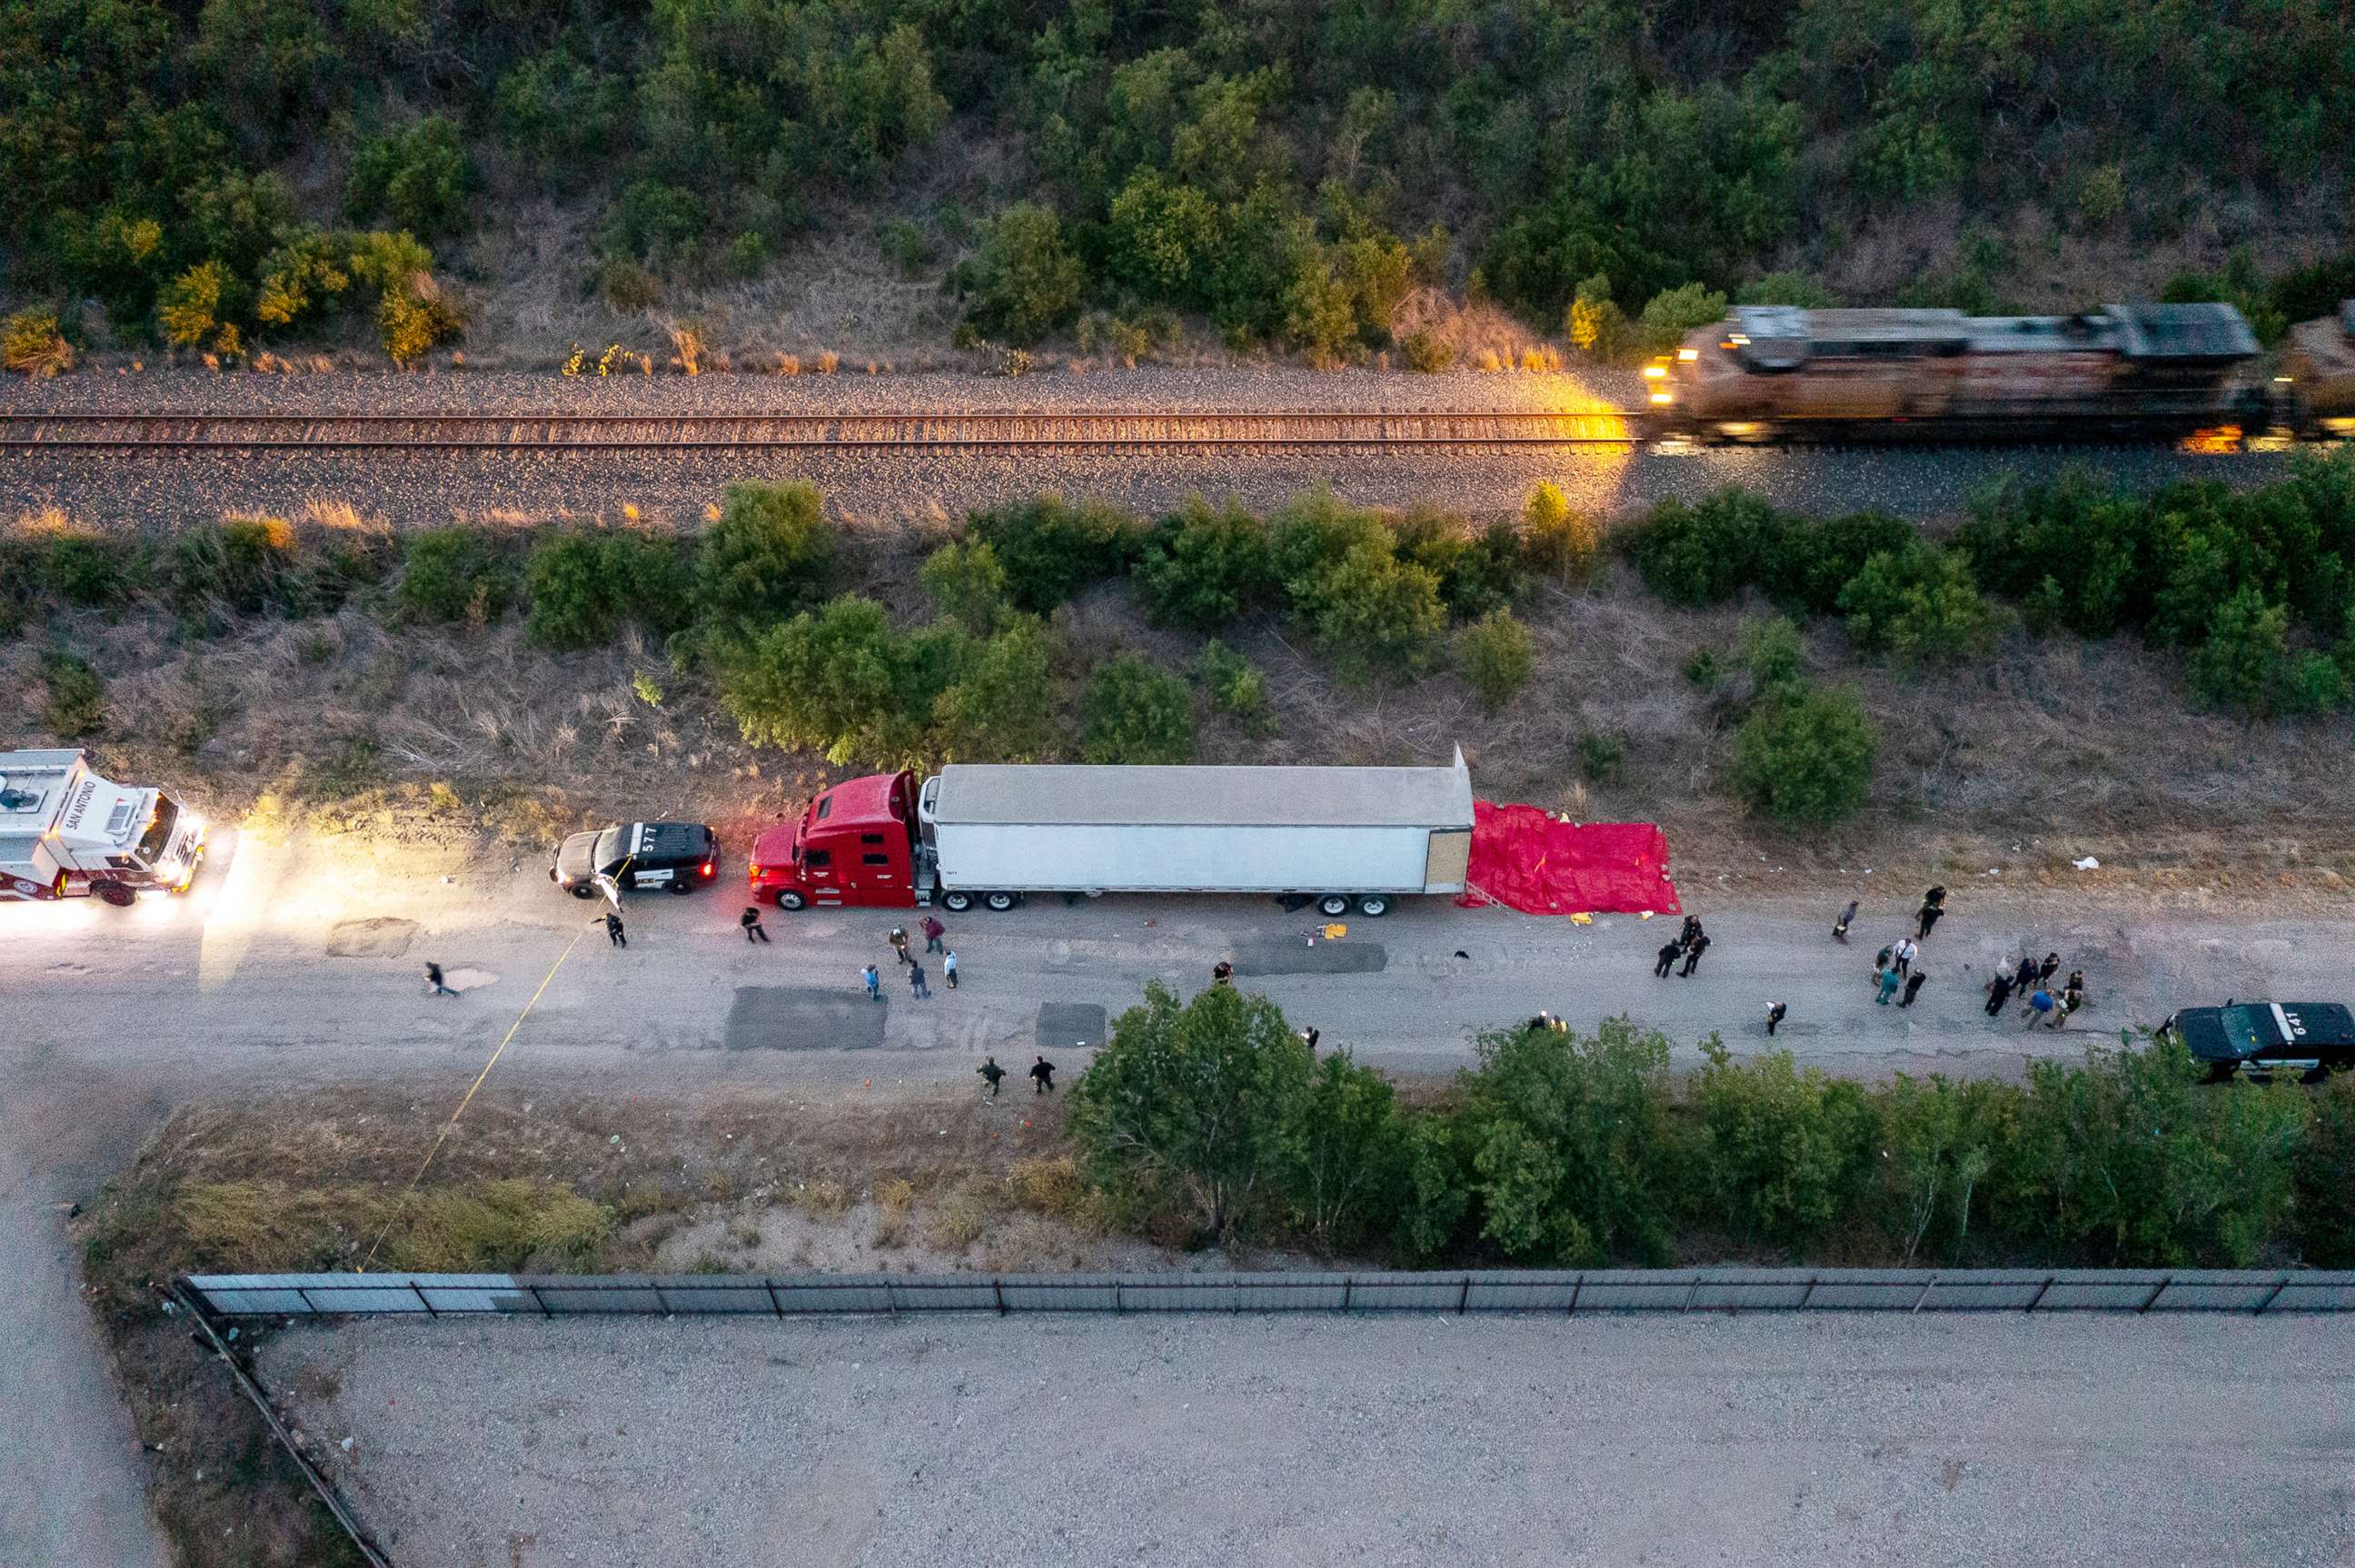 PHOTO: Members of law enforcement investigate the scene of the discovery of at least 46 people, believed to be migrant workers from Mexico, who were found dead in an abandoned tractor trailer in San Antonio, Texas, June 27, 2022.